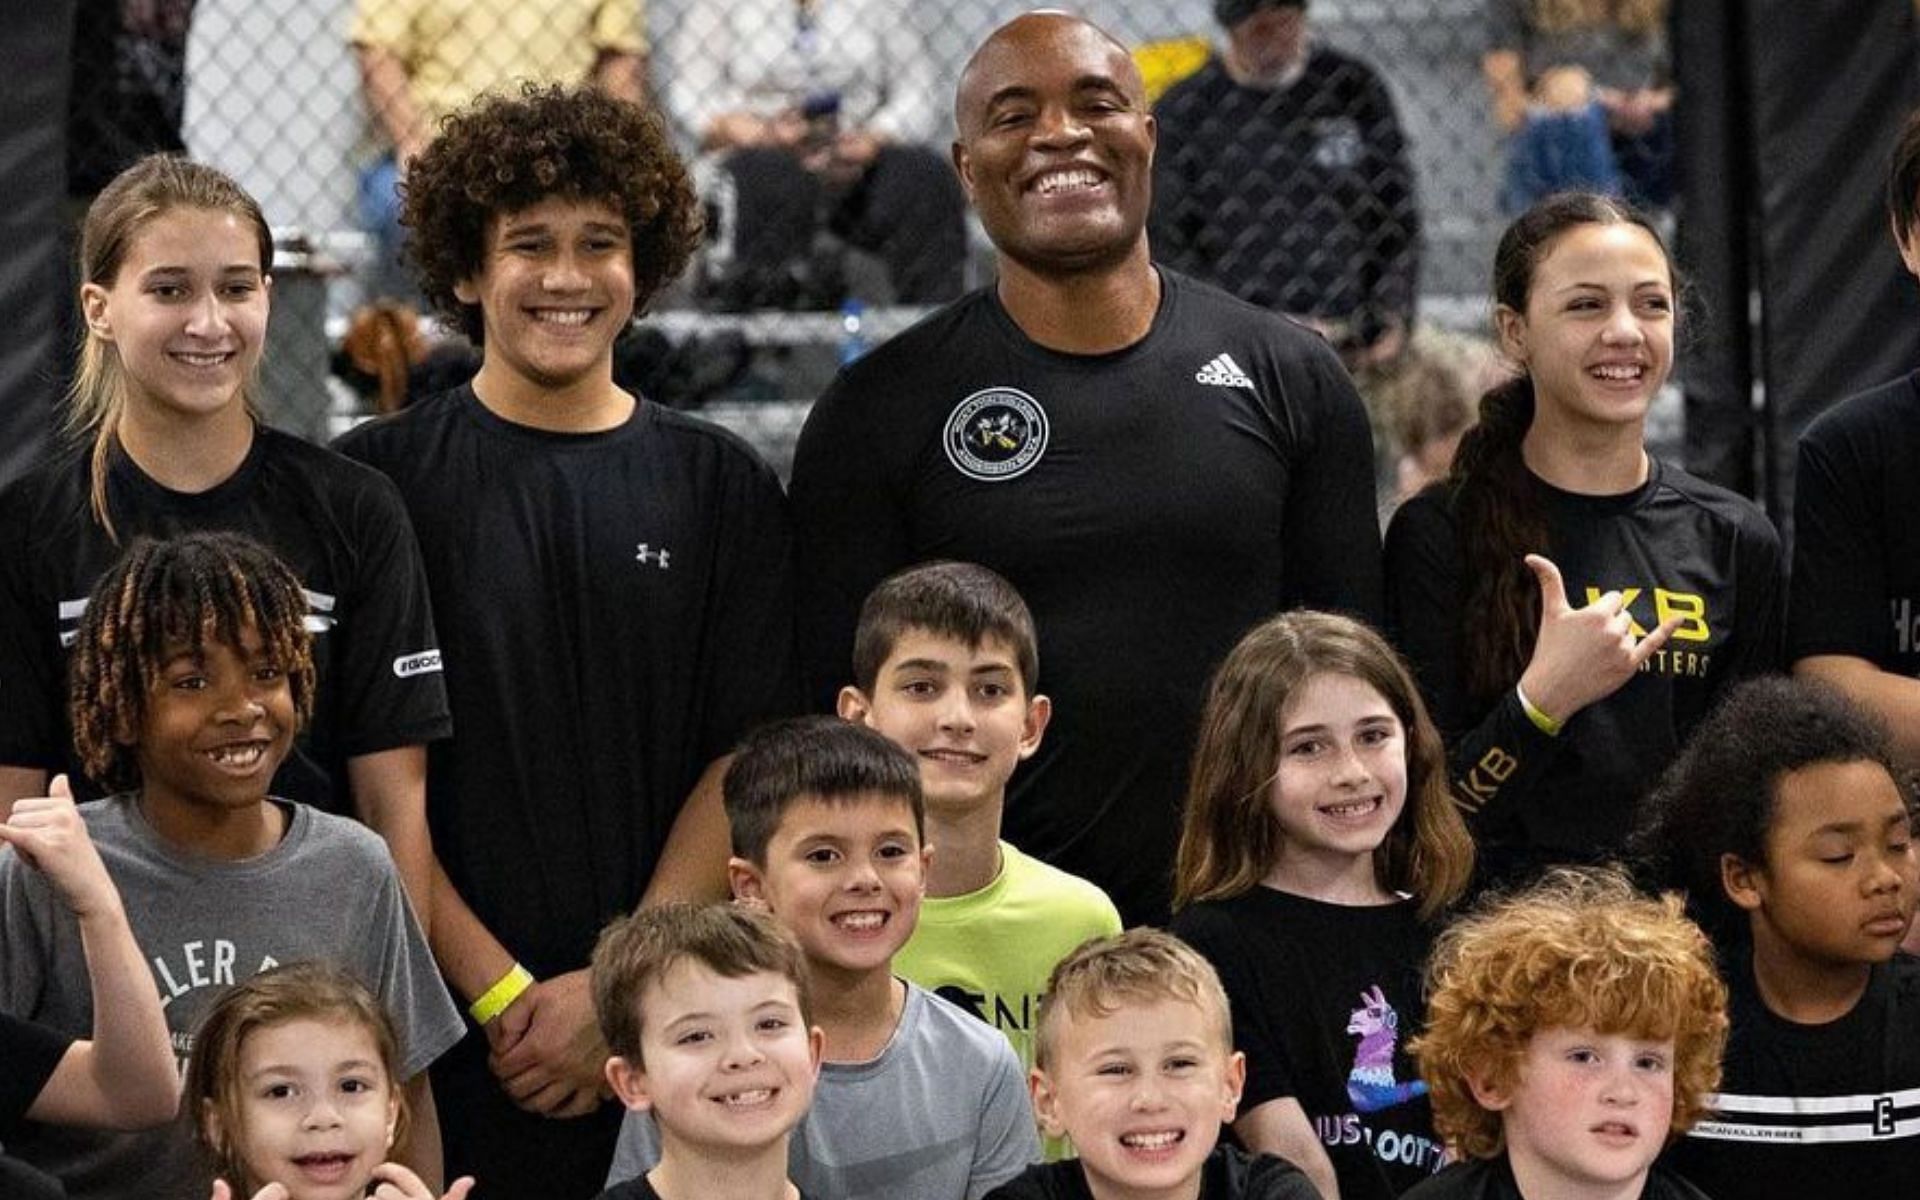 Anderson Silva with a group of kids [Image courtesy: @spiderandersonsilva on Instagram]